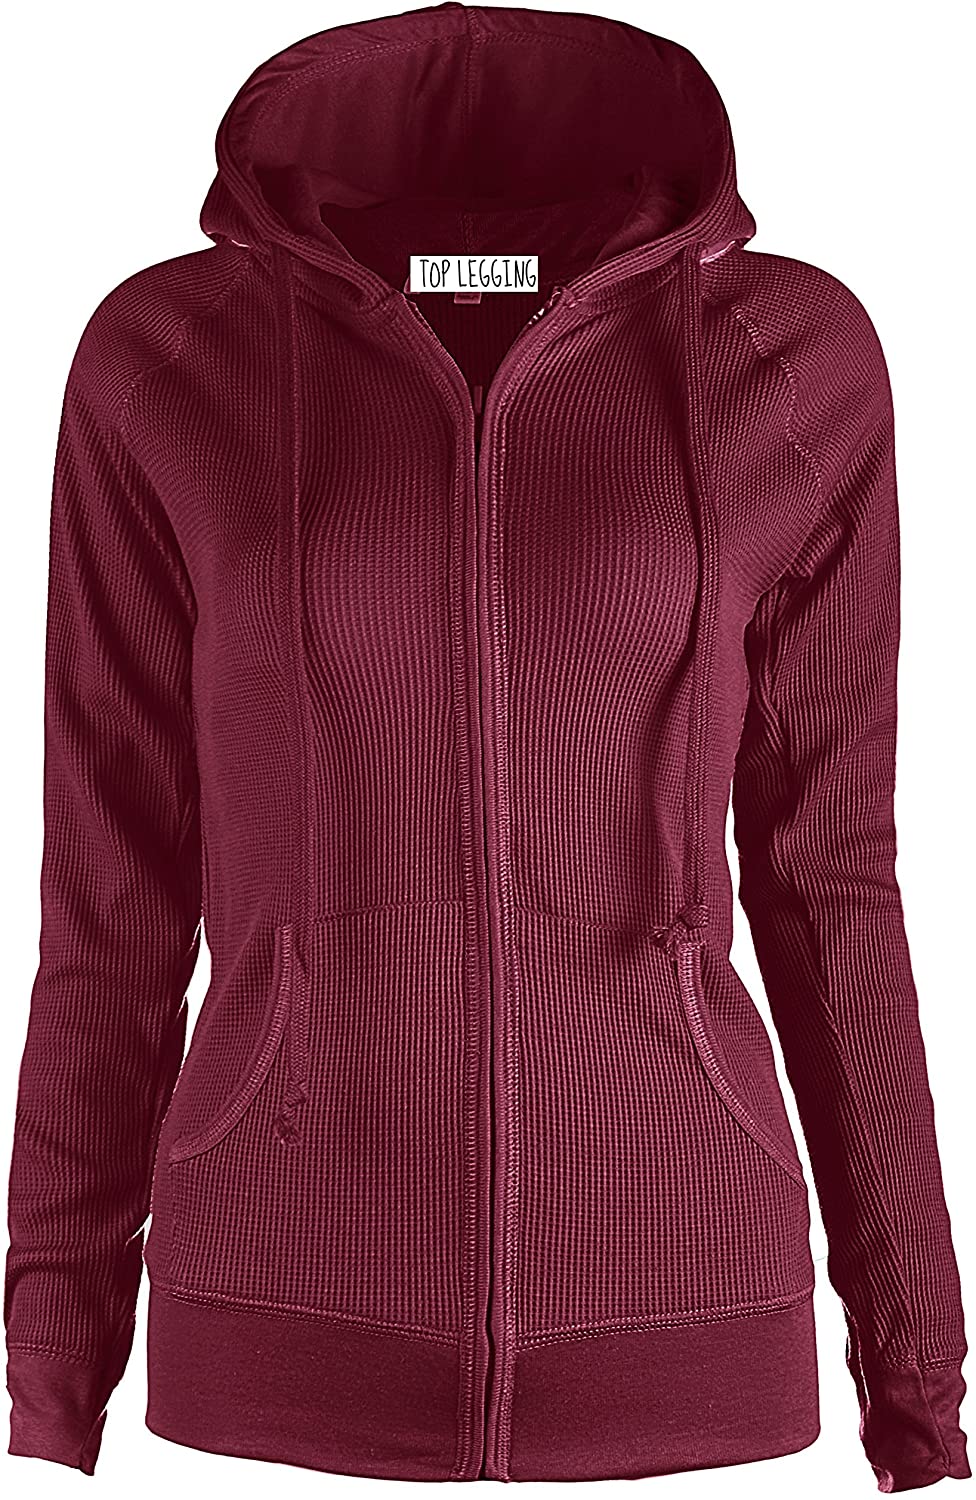 SAYEI Basic Lightweight Sweatshirt Thin Zip-Up Hoodie Pullover Jacket for Women with Plus Size 